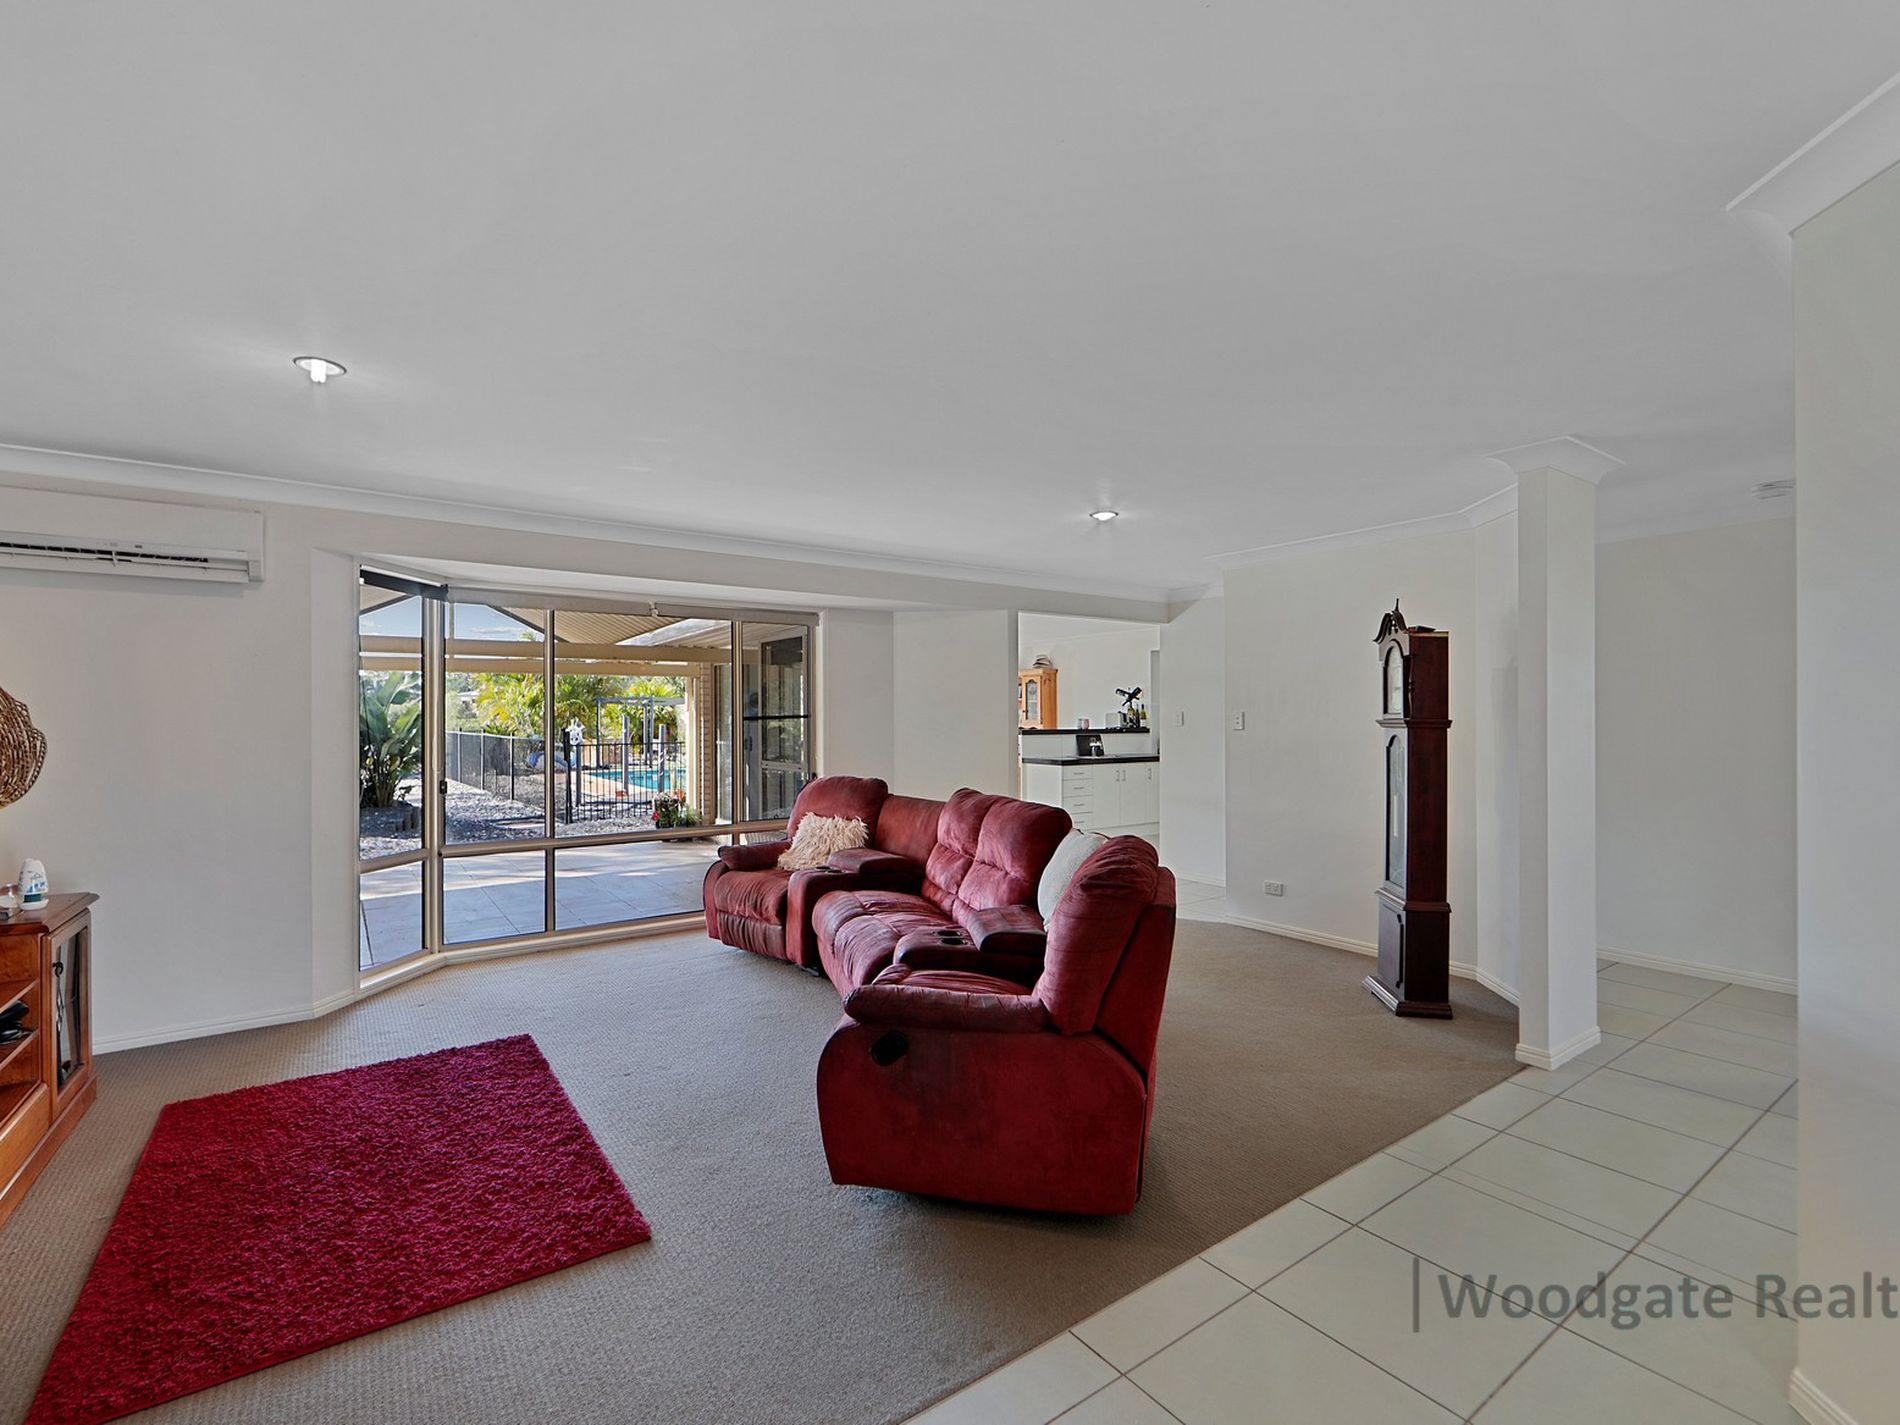 6 Dugong Court, Woodgate